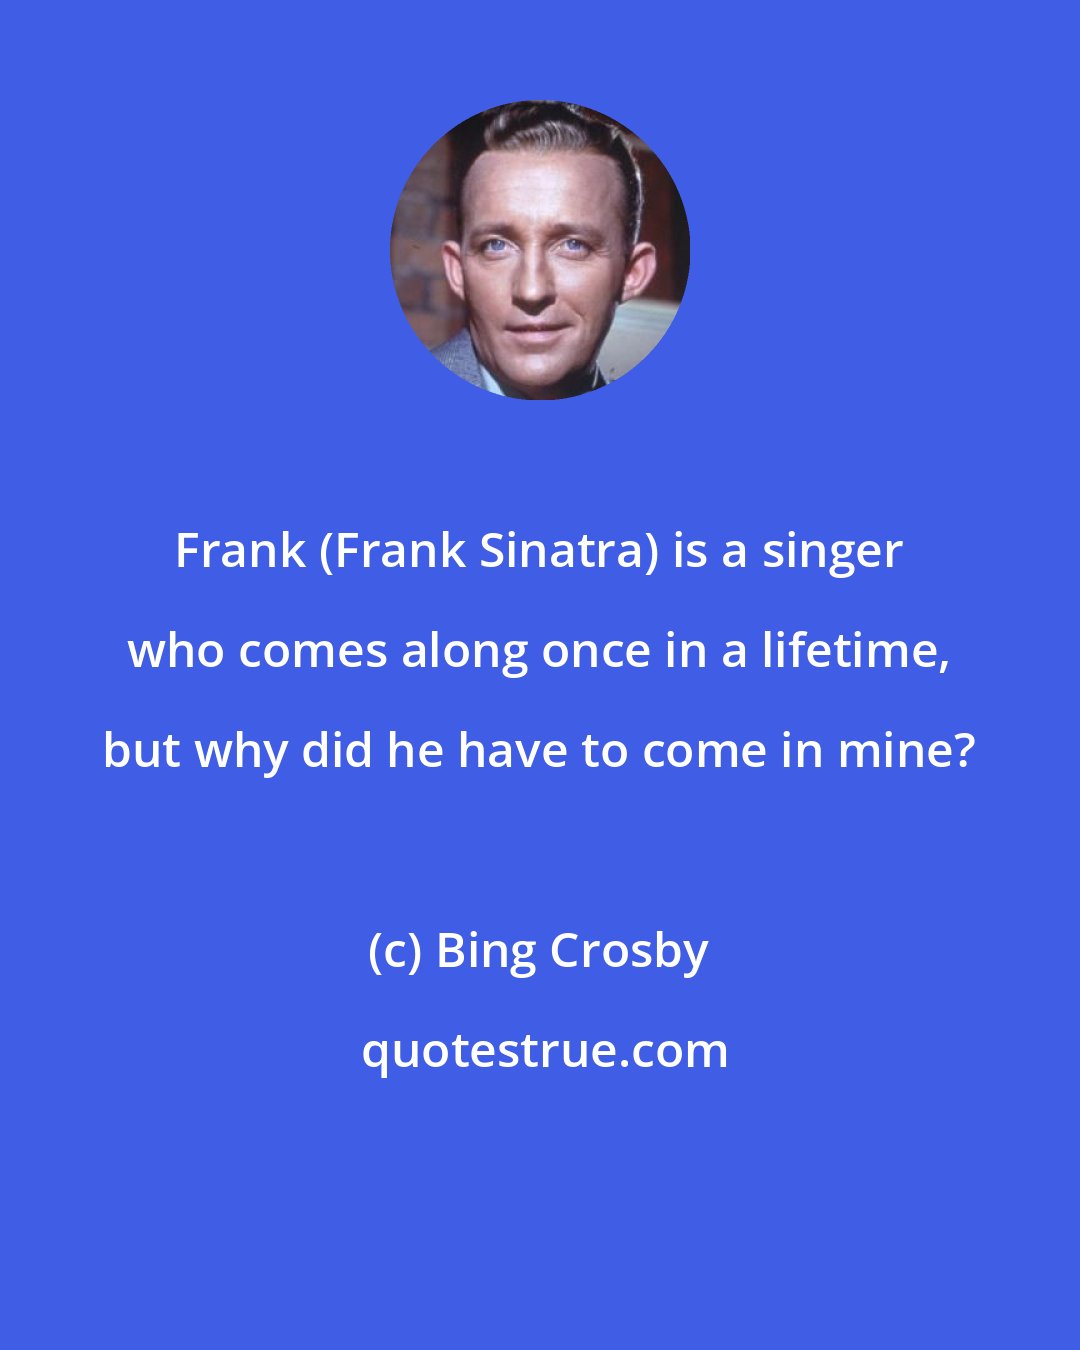 Bing Crosby: Frank (Frank Sinatra) is a singer who comes along once in a lifetime, but why did he have to come in mine?